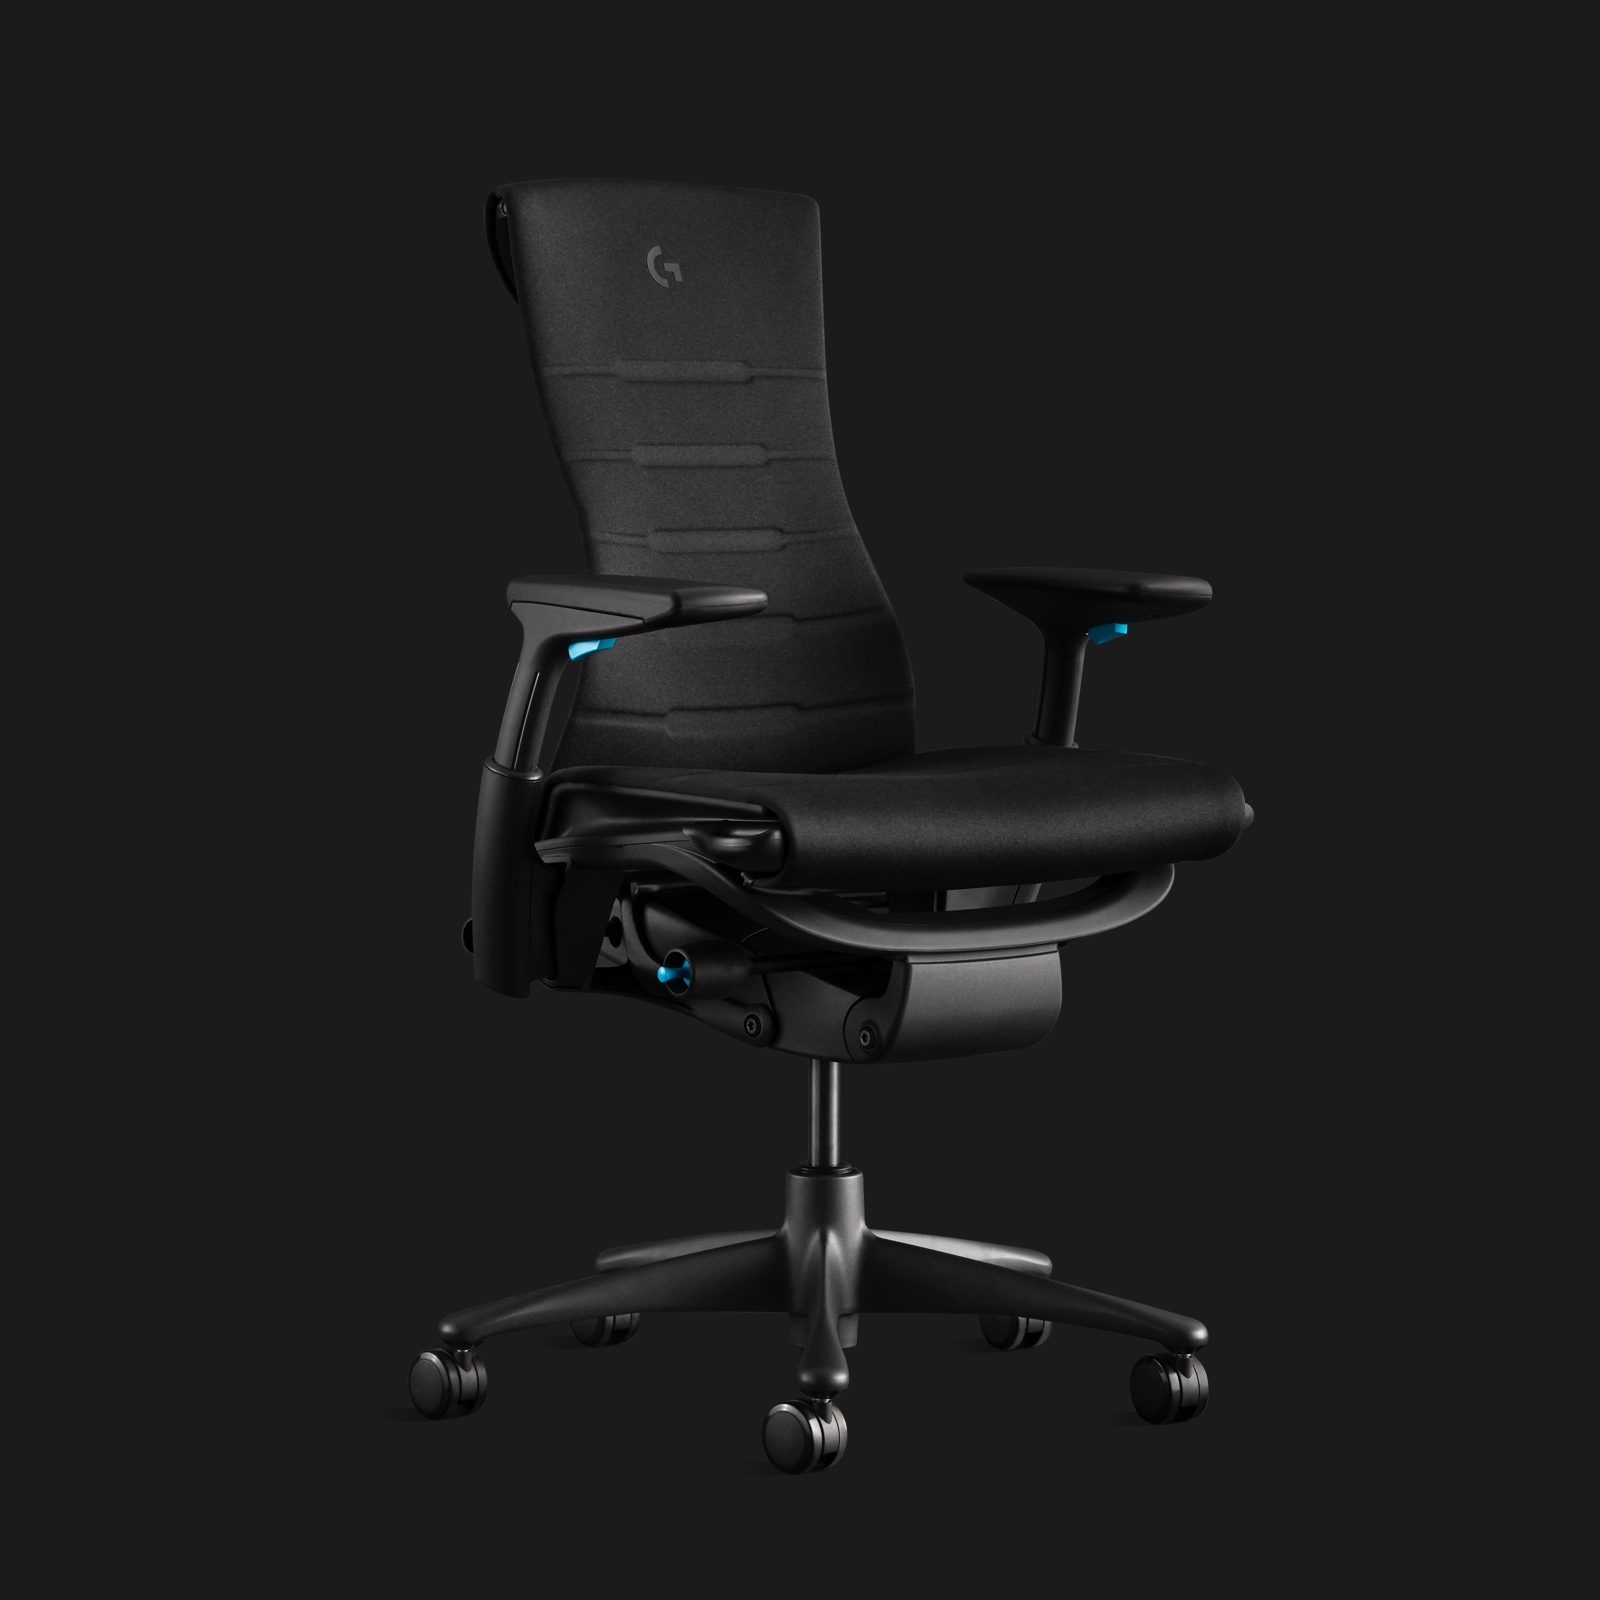 Dark grey Embody Gaming Chair with cyan fixtures and embossed Logitech G logo shown angled on a black background.